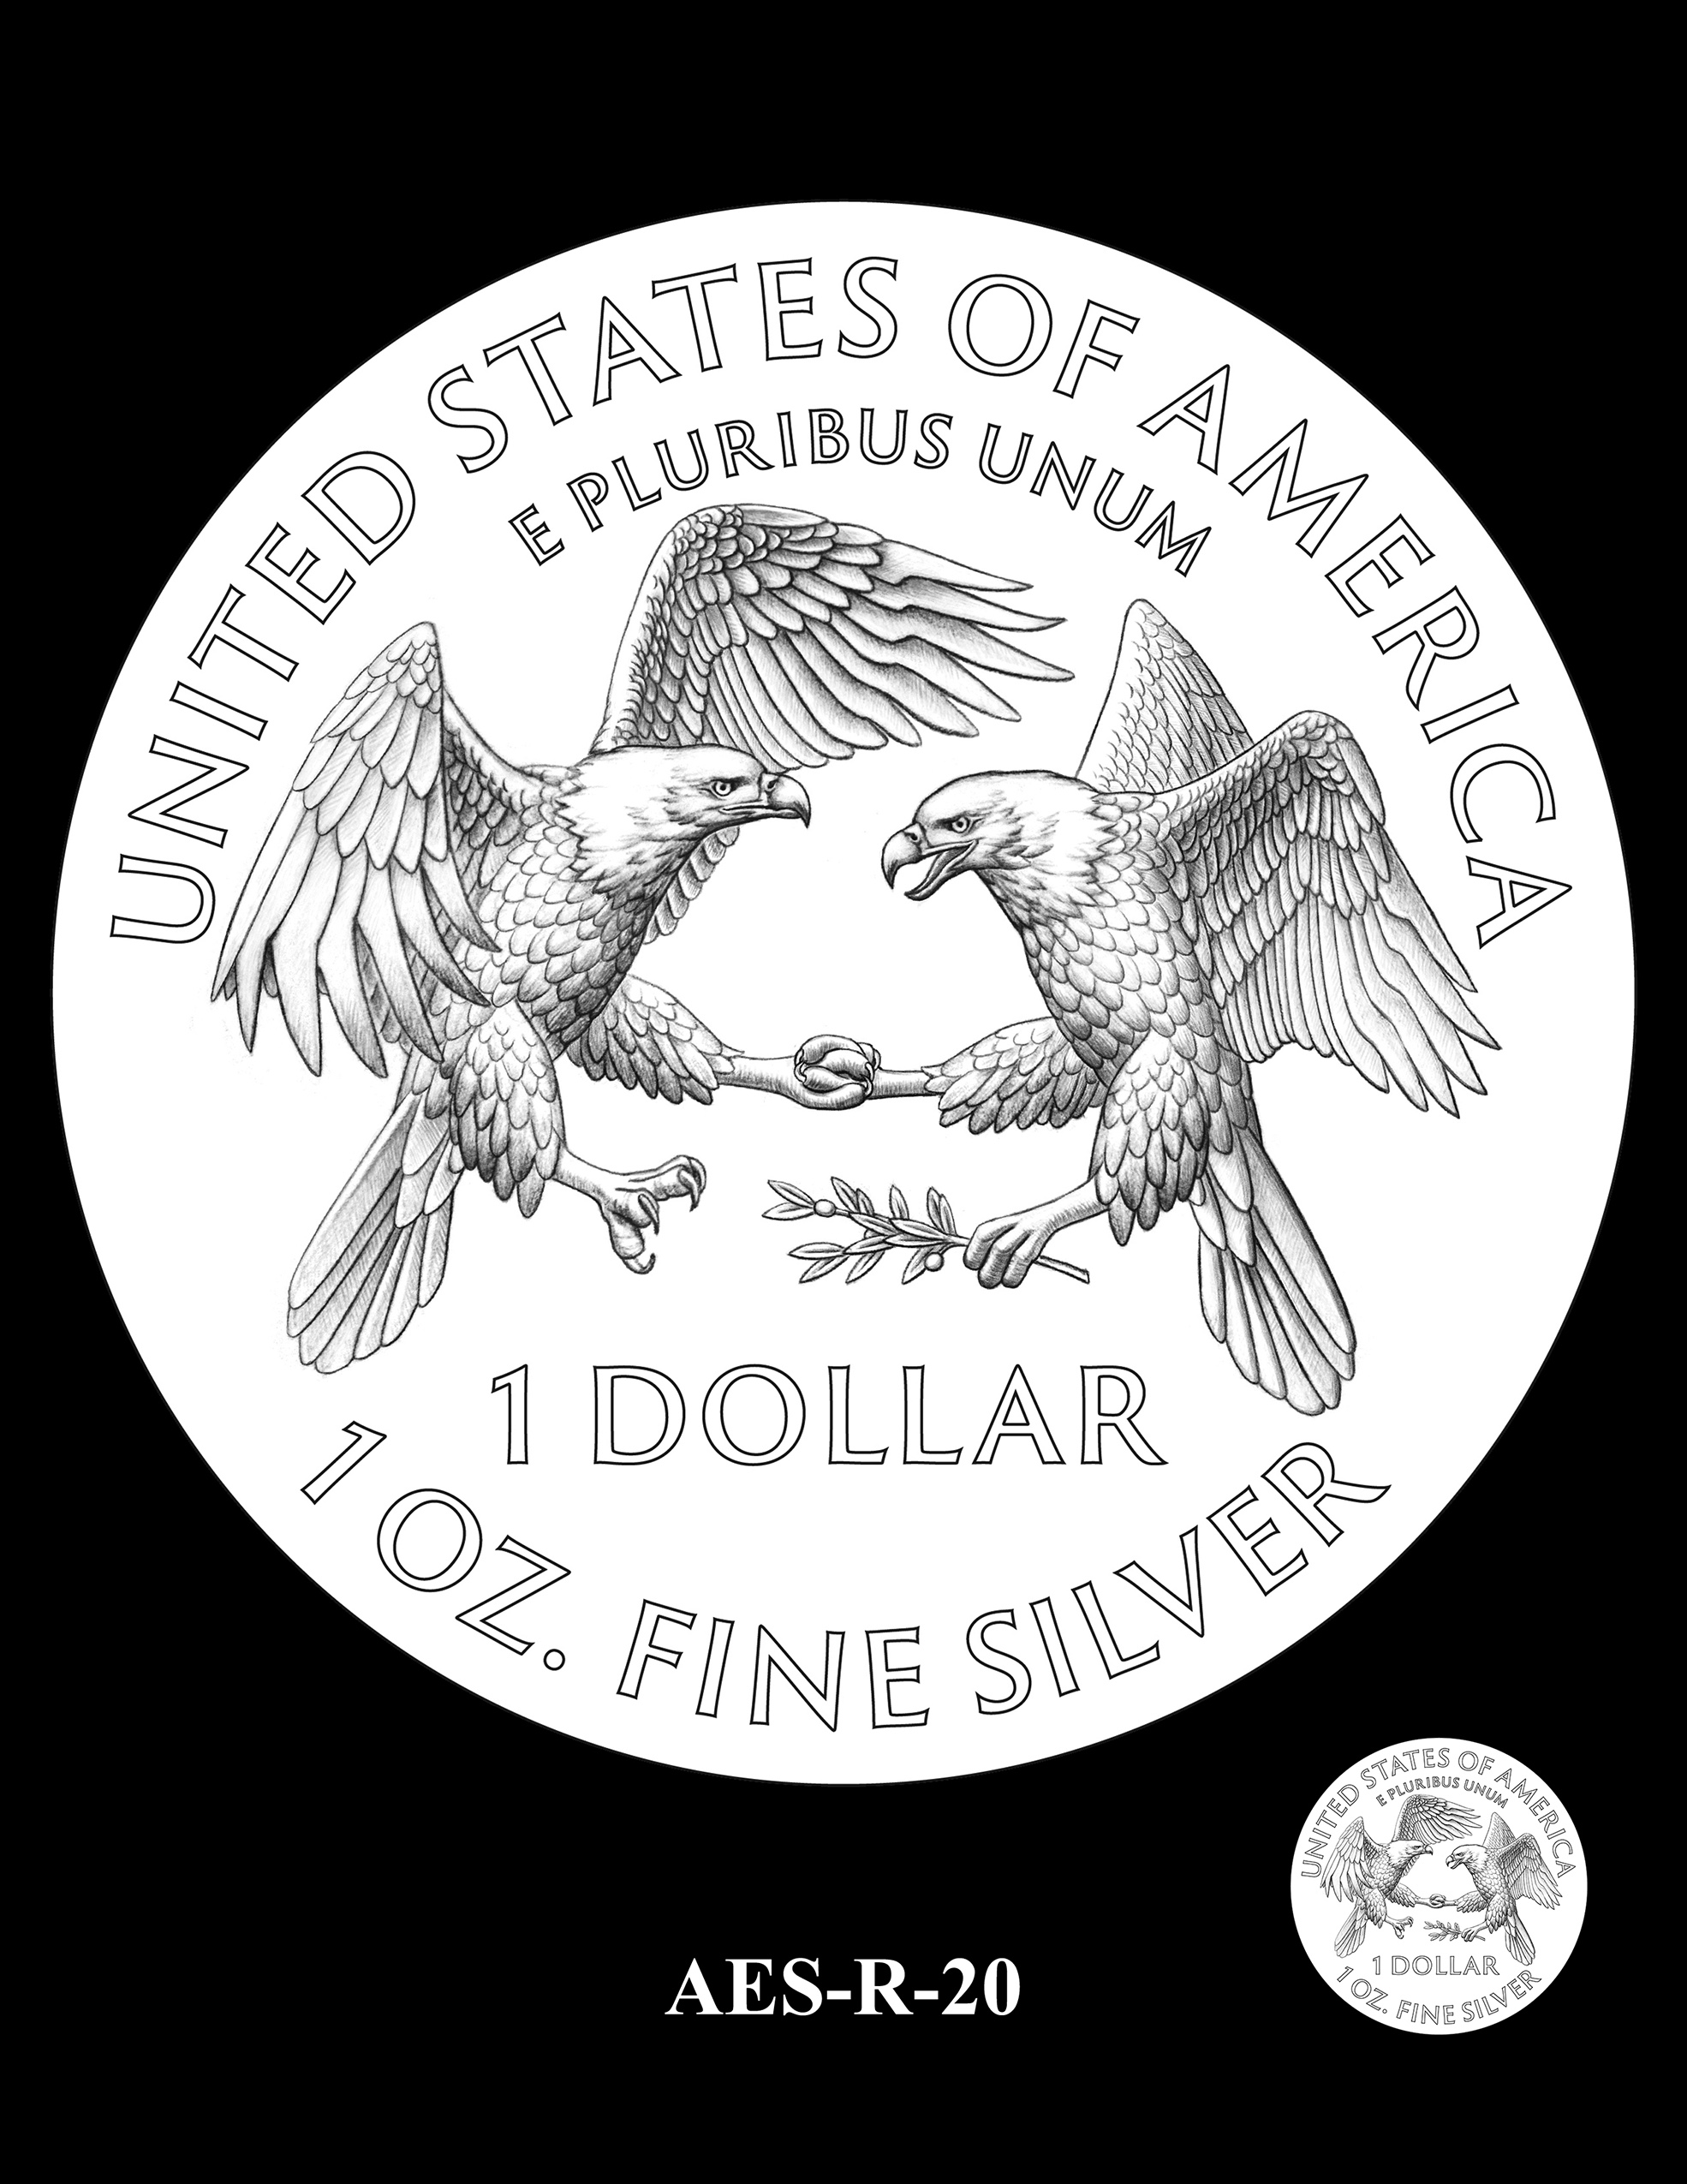 AES-R-20 -- American Eagle Proof and Bullion Silver Coin - Reverse